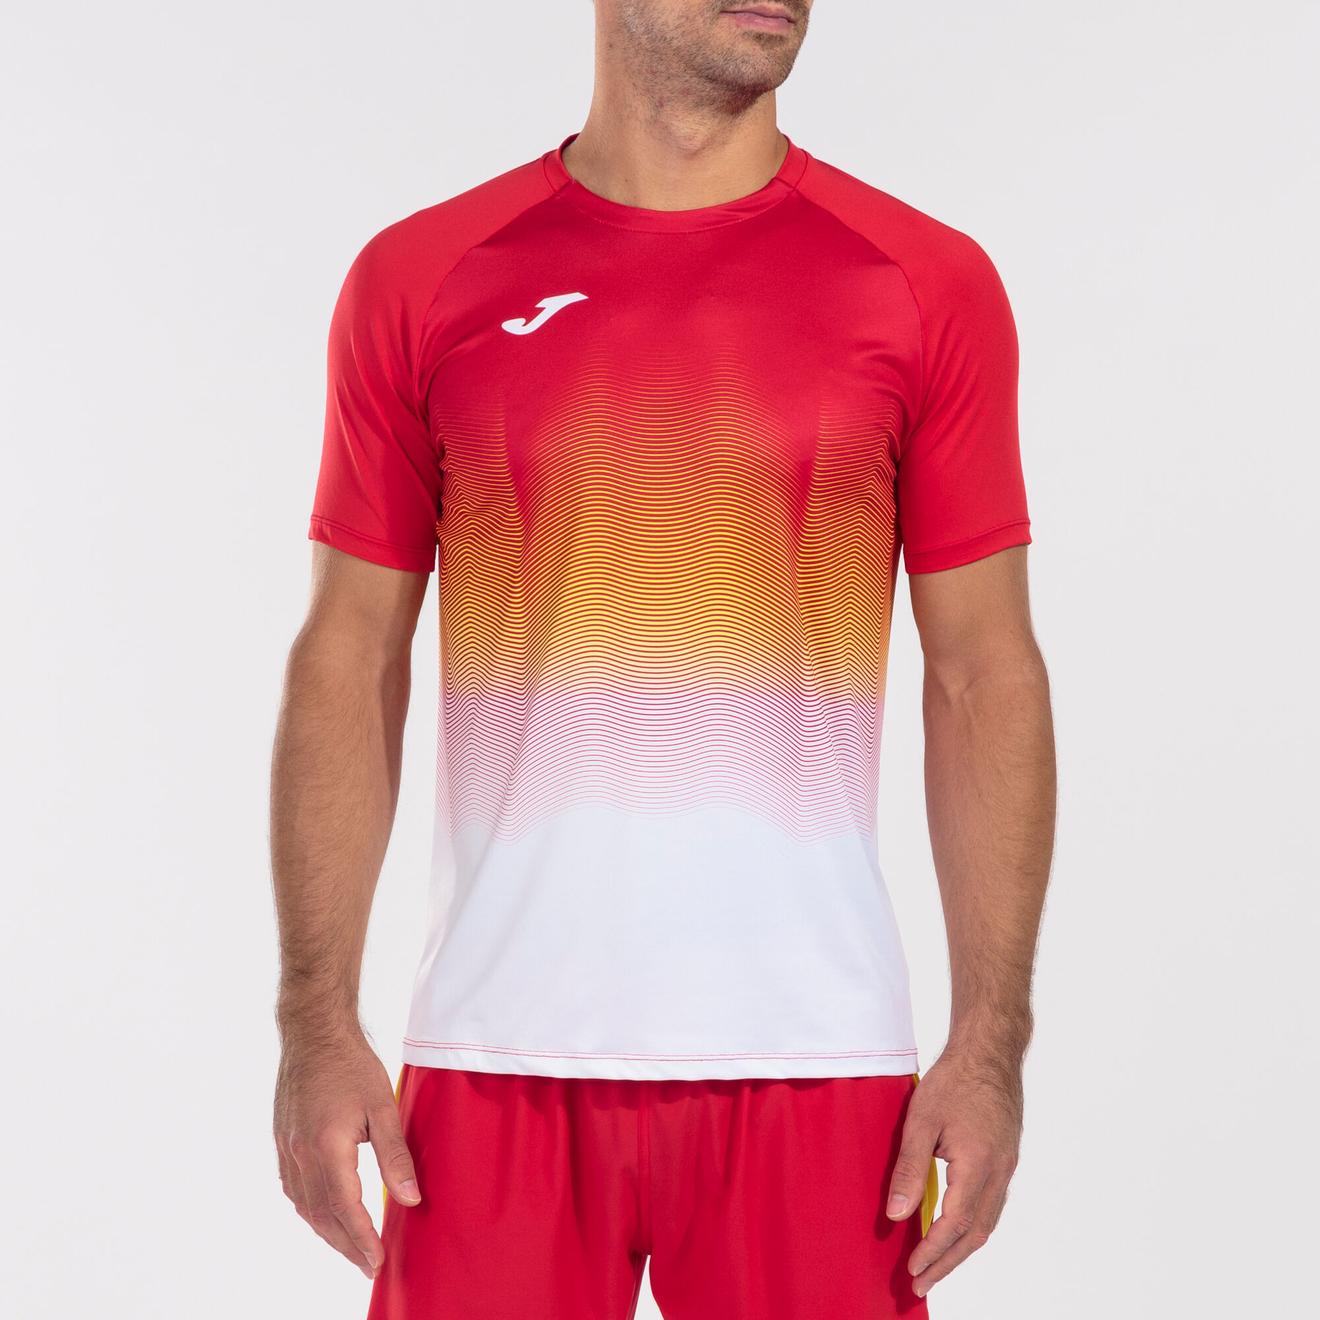 Shirt short sleeve man Elite VII red white yellow offers at £12.5 in Joma